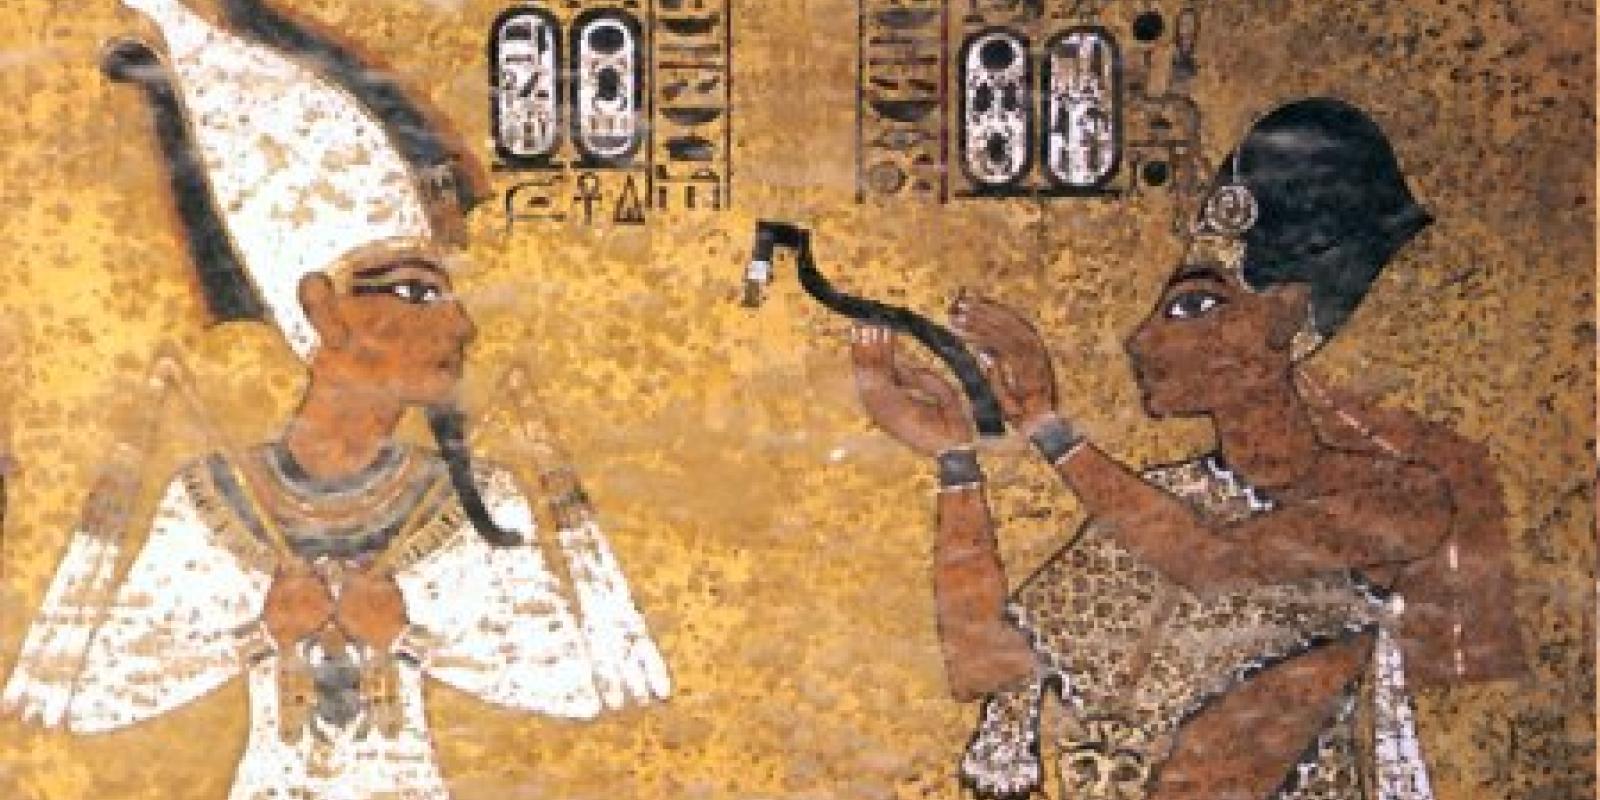 Salima Ikram analysis how science and technology are aiding investigations of Tutankhamen’s Tomb